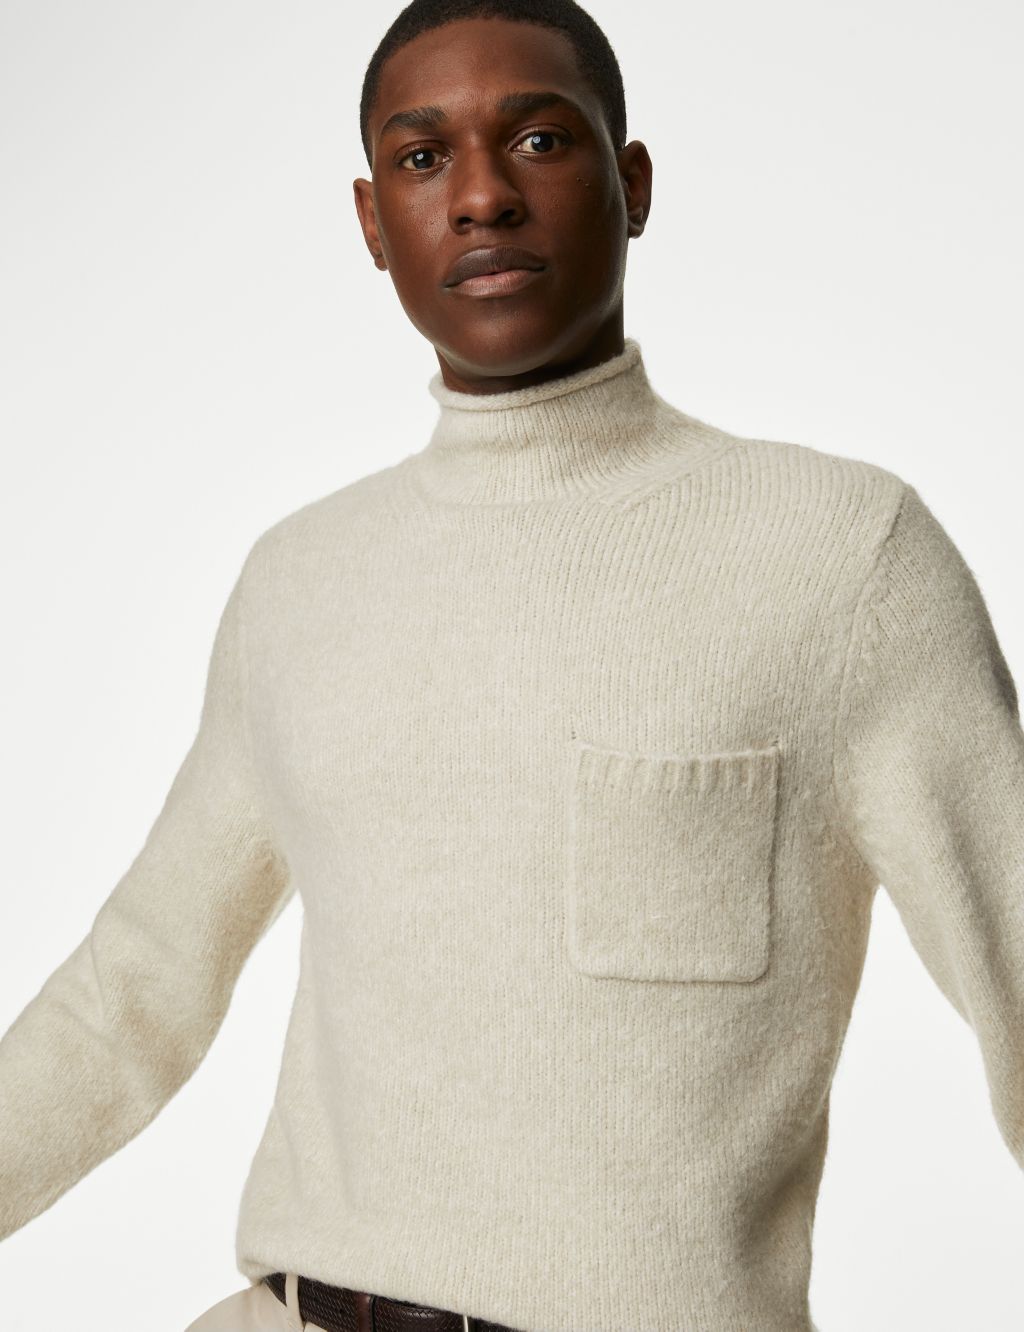 Chunky High Neck Jumper image 1